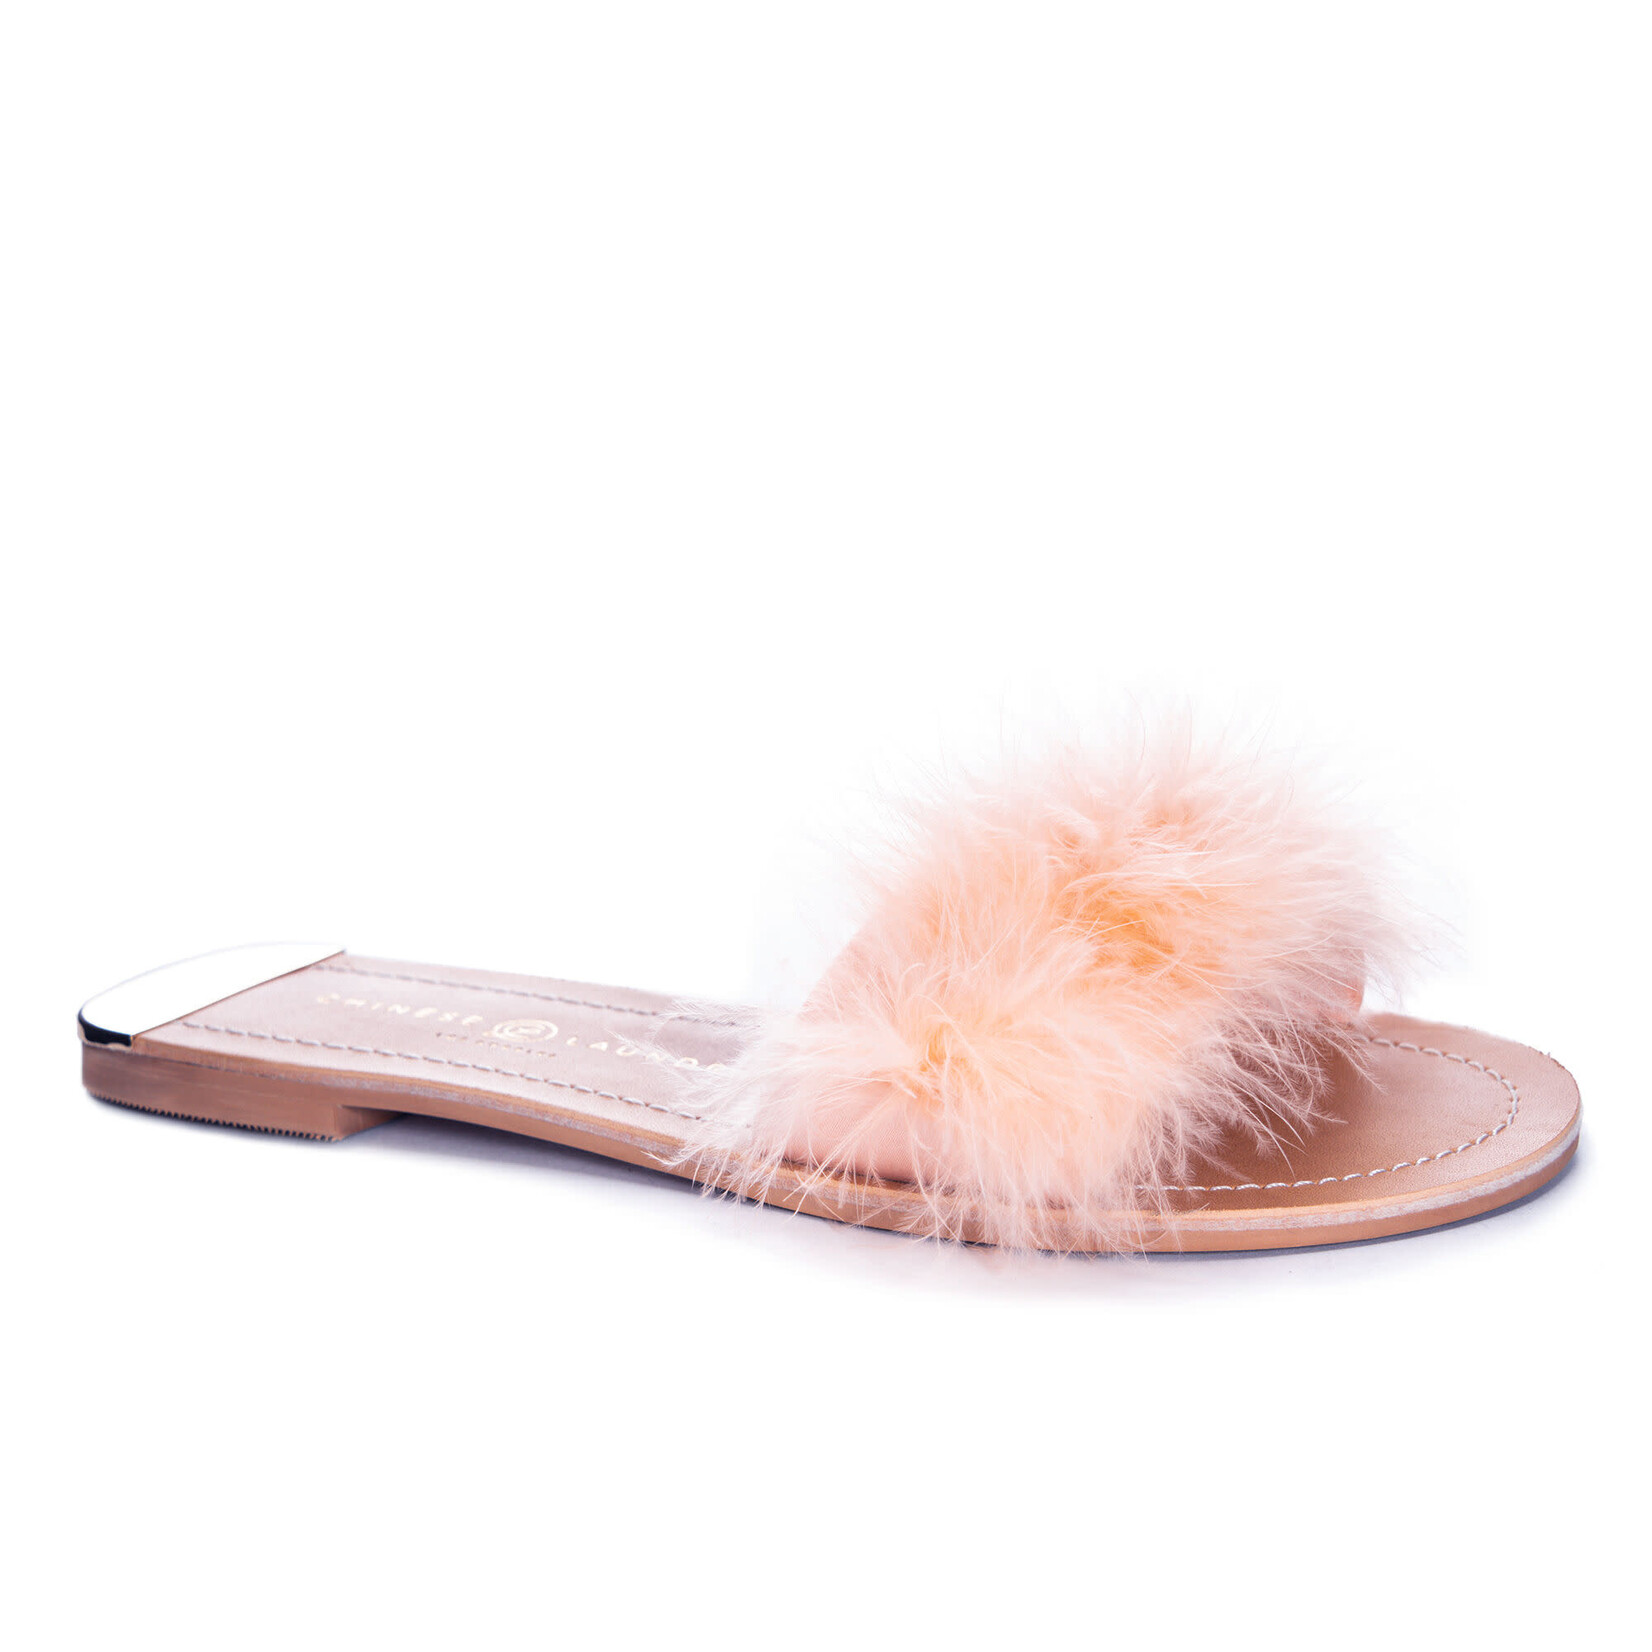 Chinese Laundry Zoey Slide Pink Marabou Feathers by Chinese Laundry Final Sale No Box